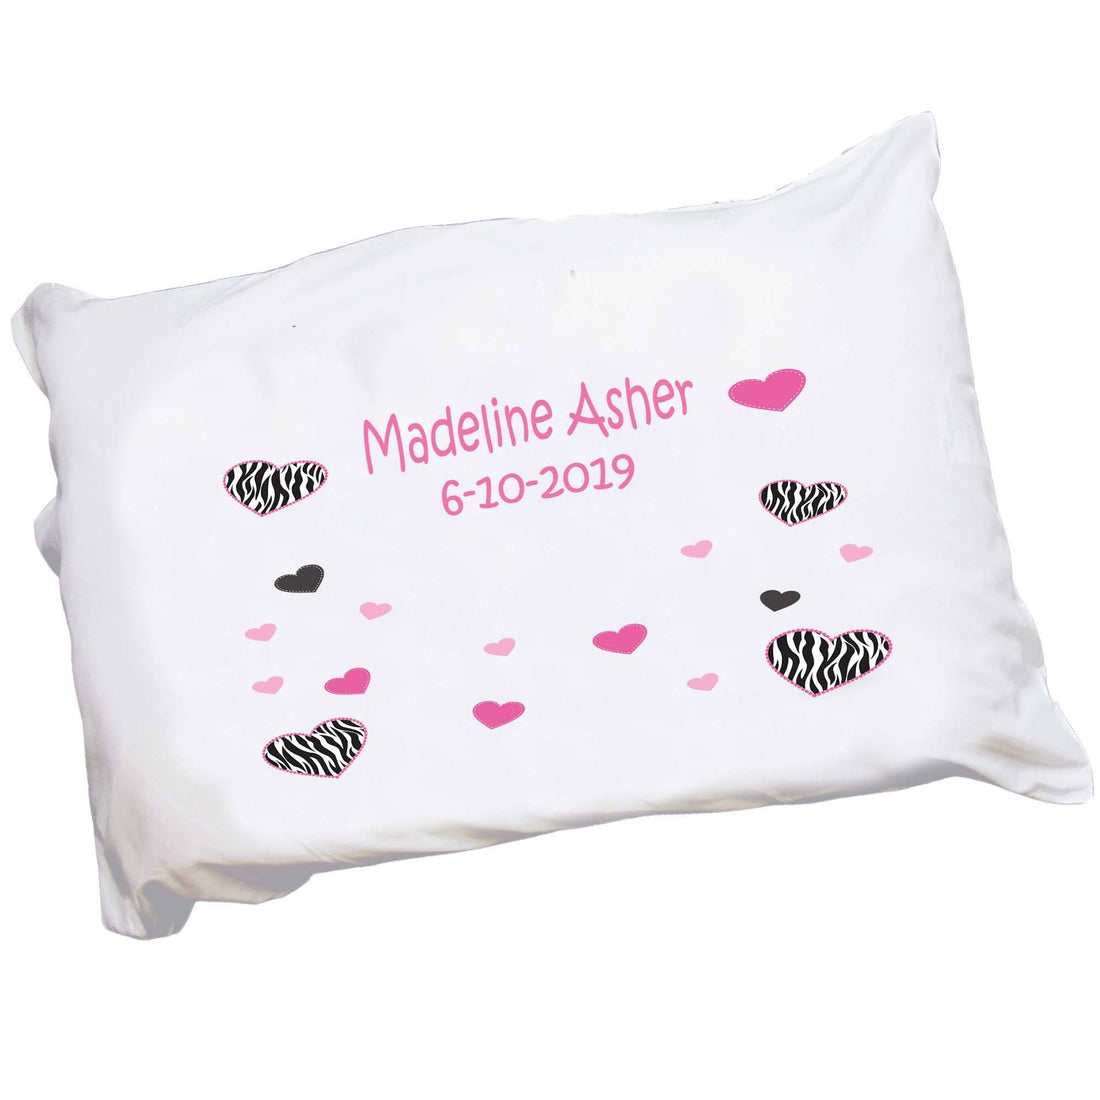 Personalized Childrens Pillowcase with Groovy Zebra design